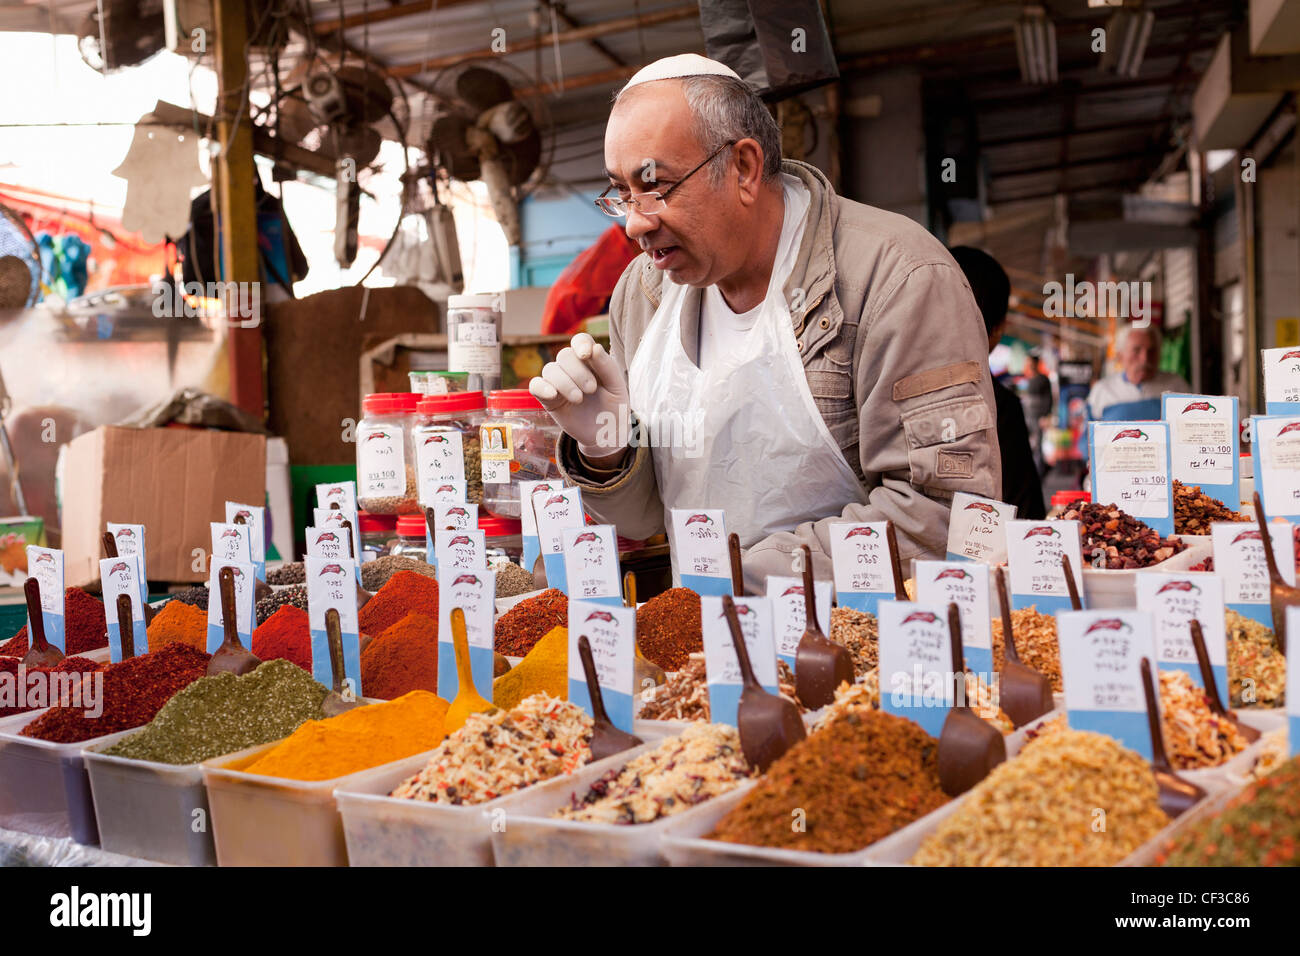 Israel, Tel Aviv, Carmel Market, spice vendor with a display of fresh herbs and spices Stock Photo